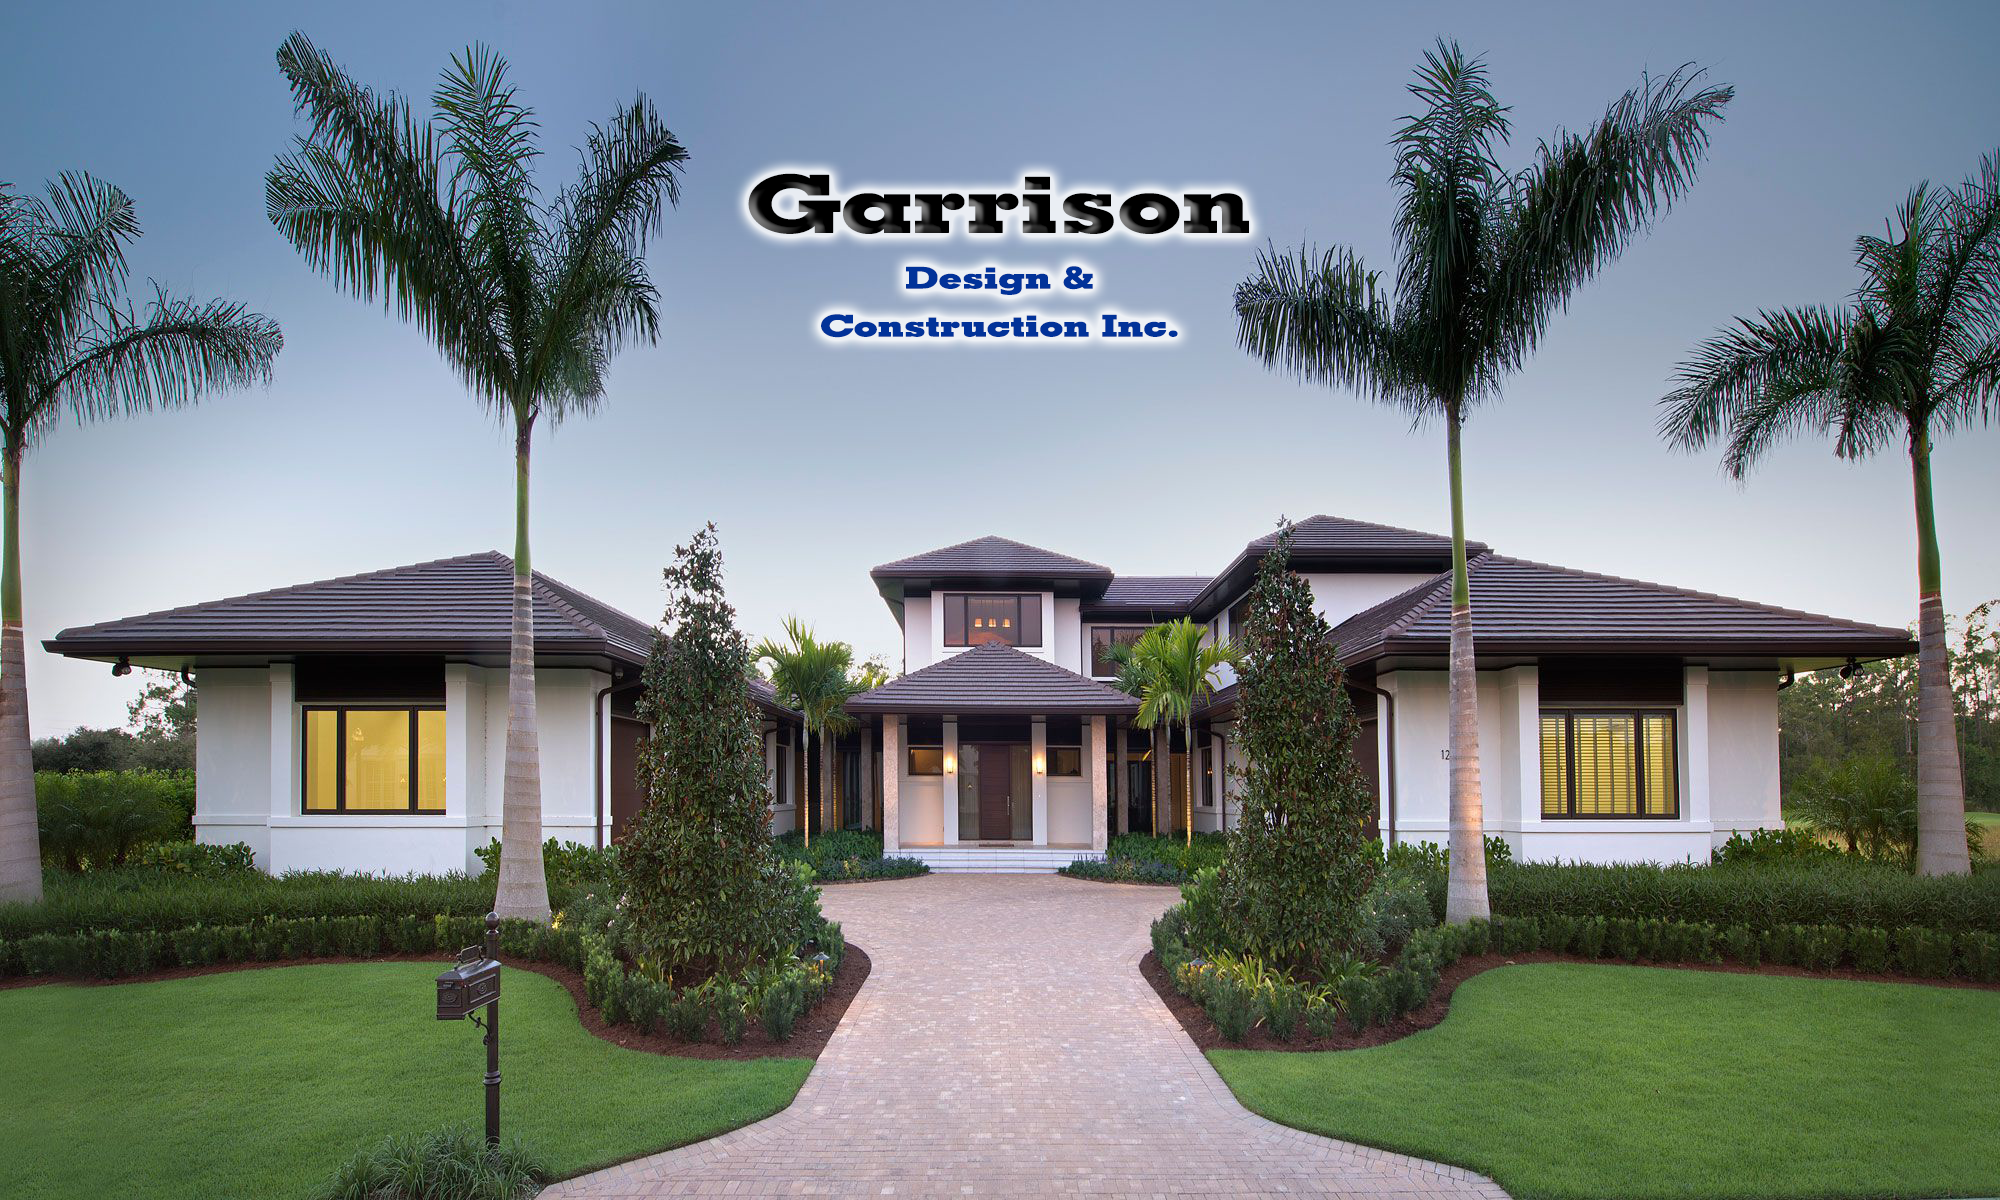 Garrison Design Construction Tallahassee Construction Design Metal Roofing Construction Company Professional Metal Roofing Sales Installation